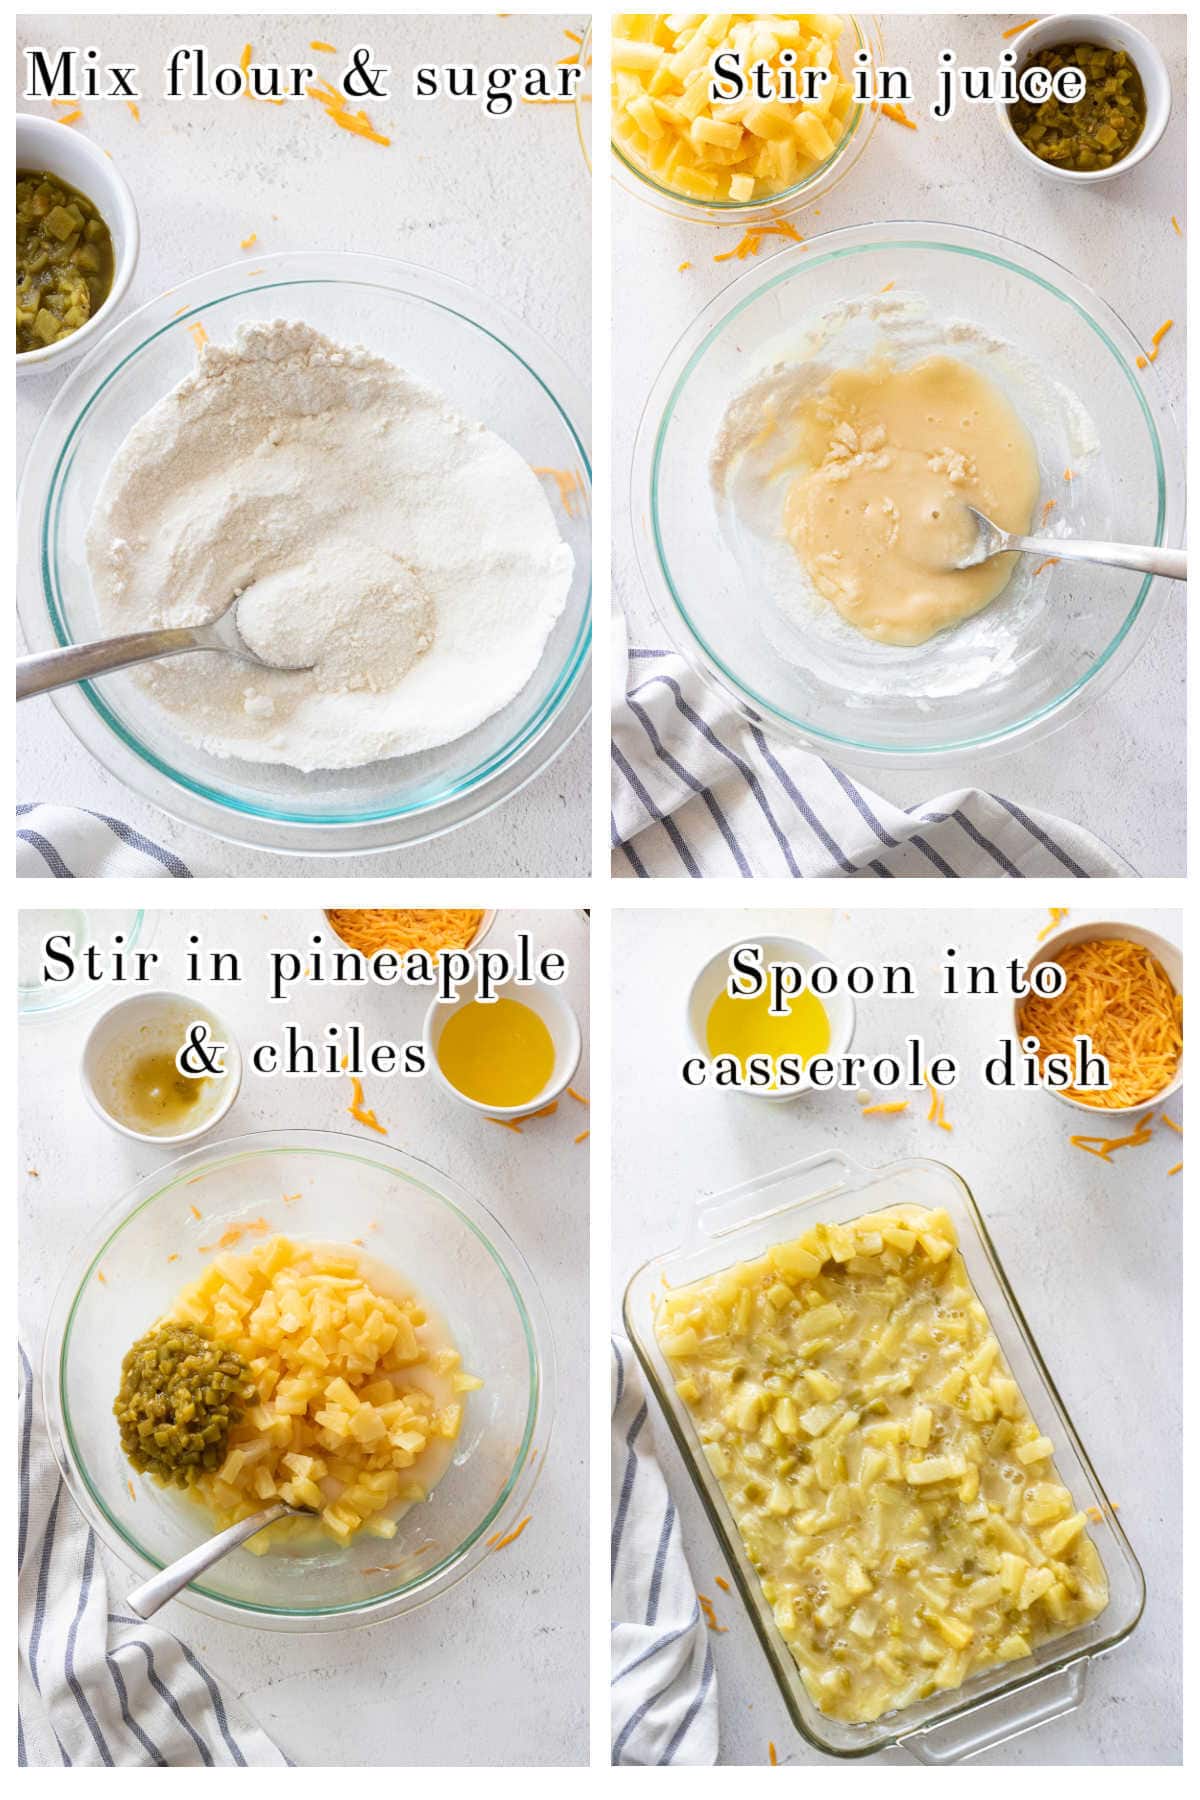 Step by step images for making pineapple cheese casserole.